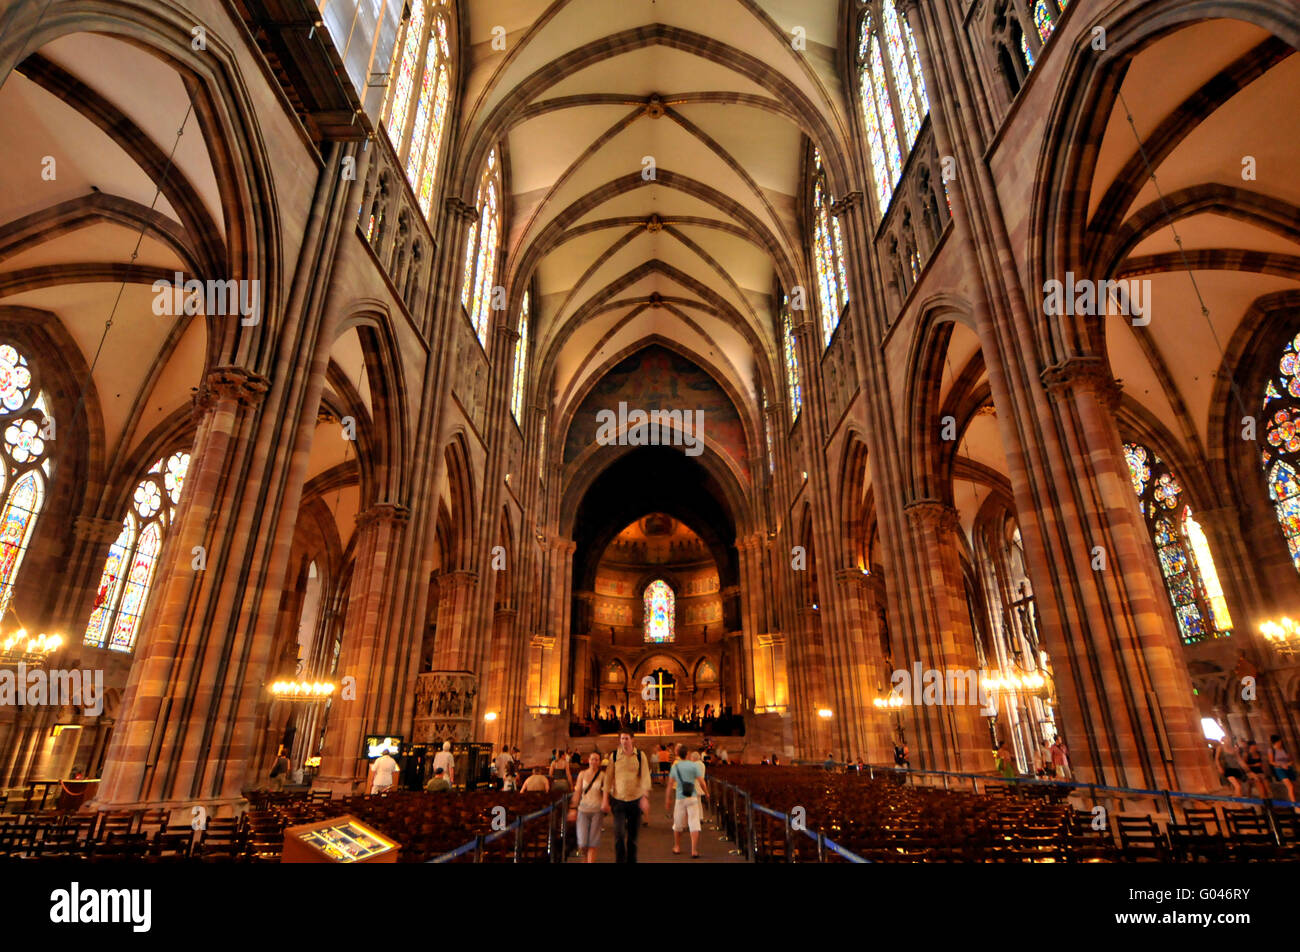 Cathedral of Our Lady of Strasbourg, Strasbourg, Alsace, France / Strasbourg Cathedral, Cathedrale Notre-Dame-de-Strasbourg, Cathedrale Notre Dame de Strasbourg Stock Photo